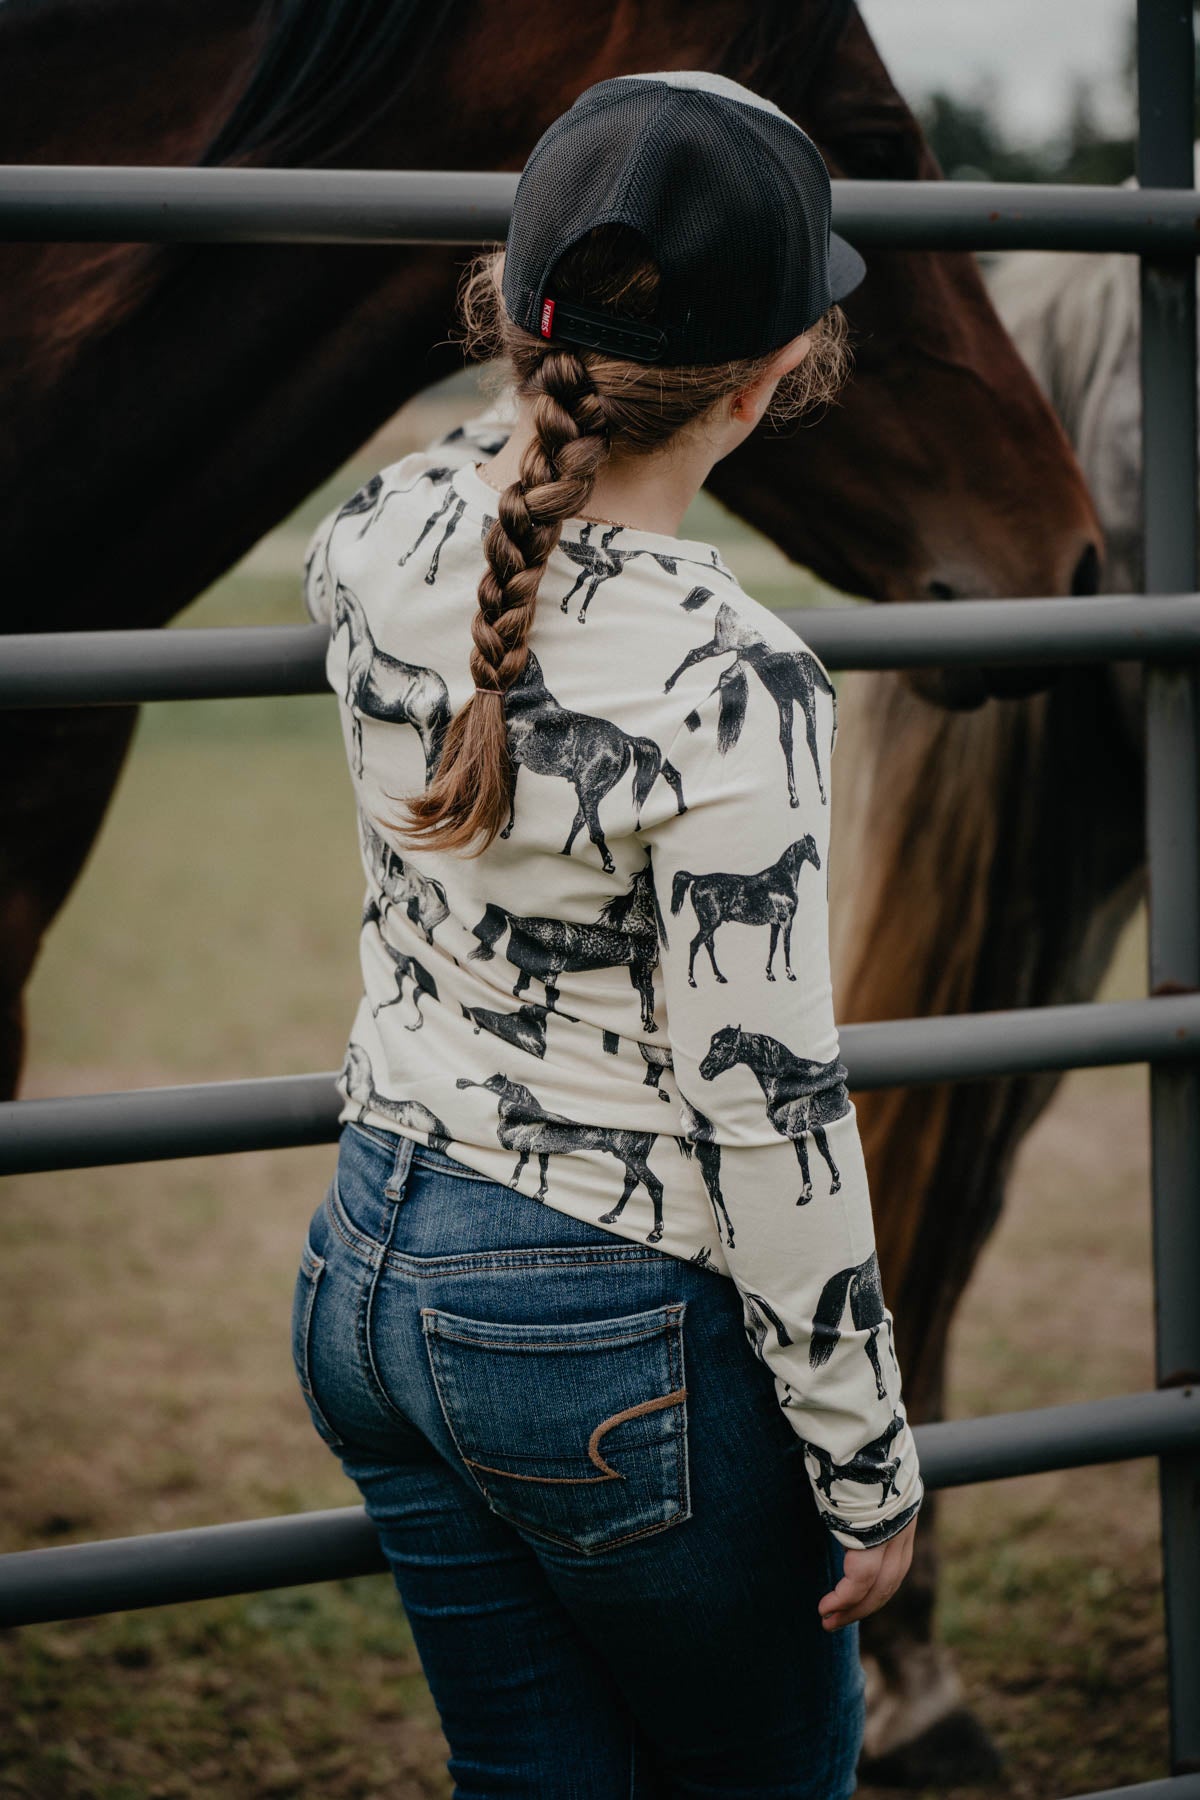 'The Filly' Girls Ariat Horse Print Long Sleeve Shirt (L Only)